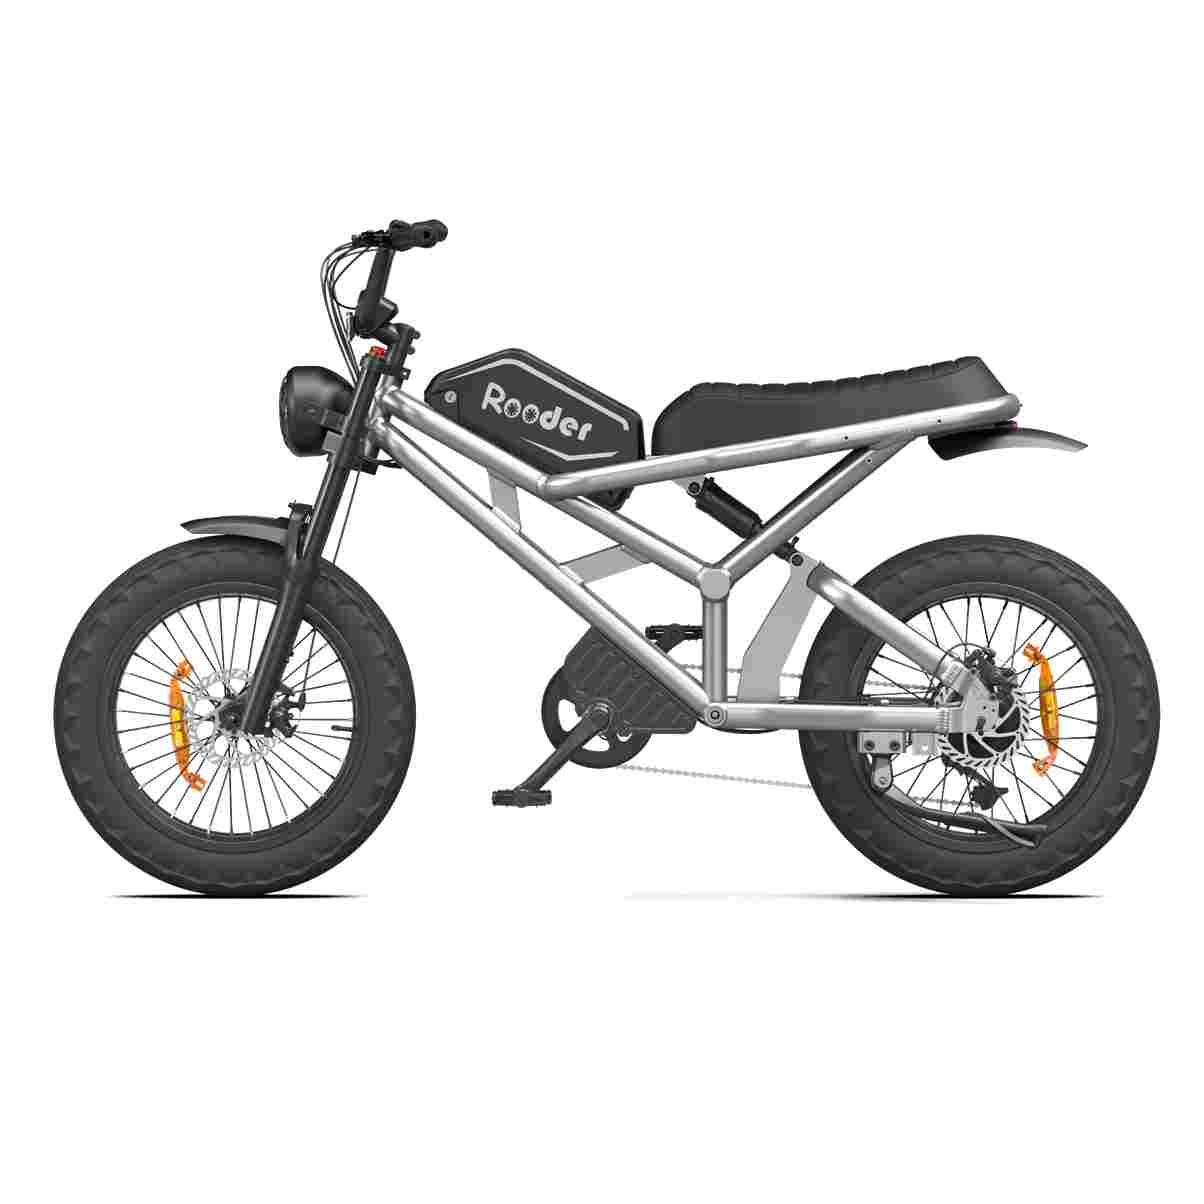 Offroading Scooter wholesale price